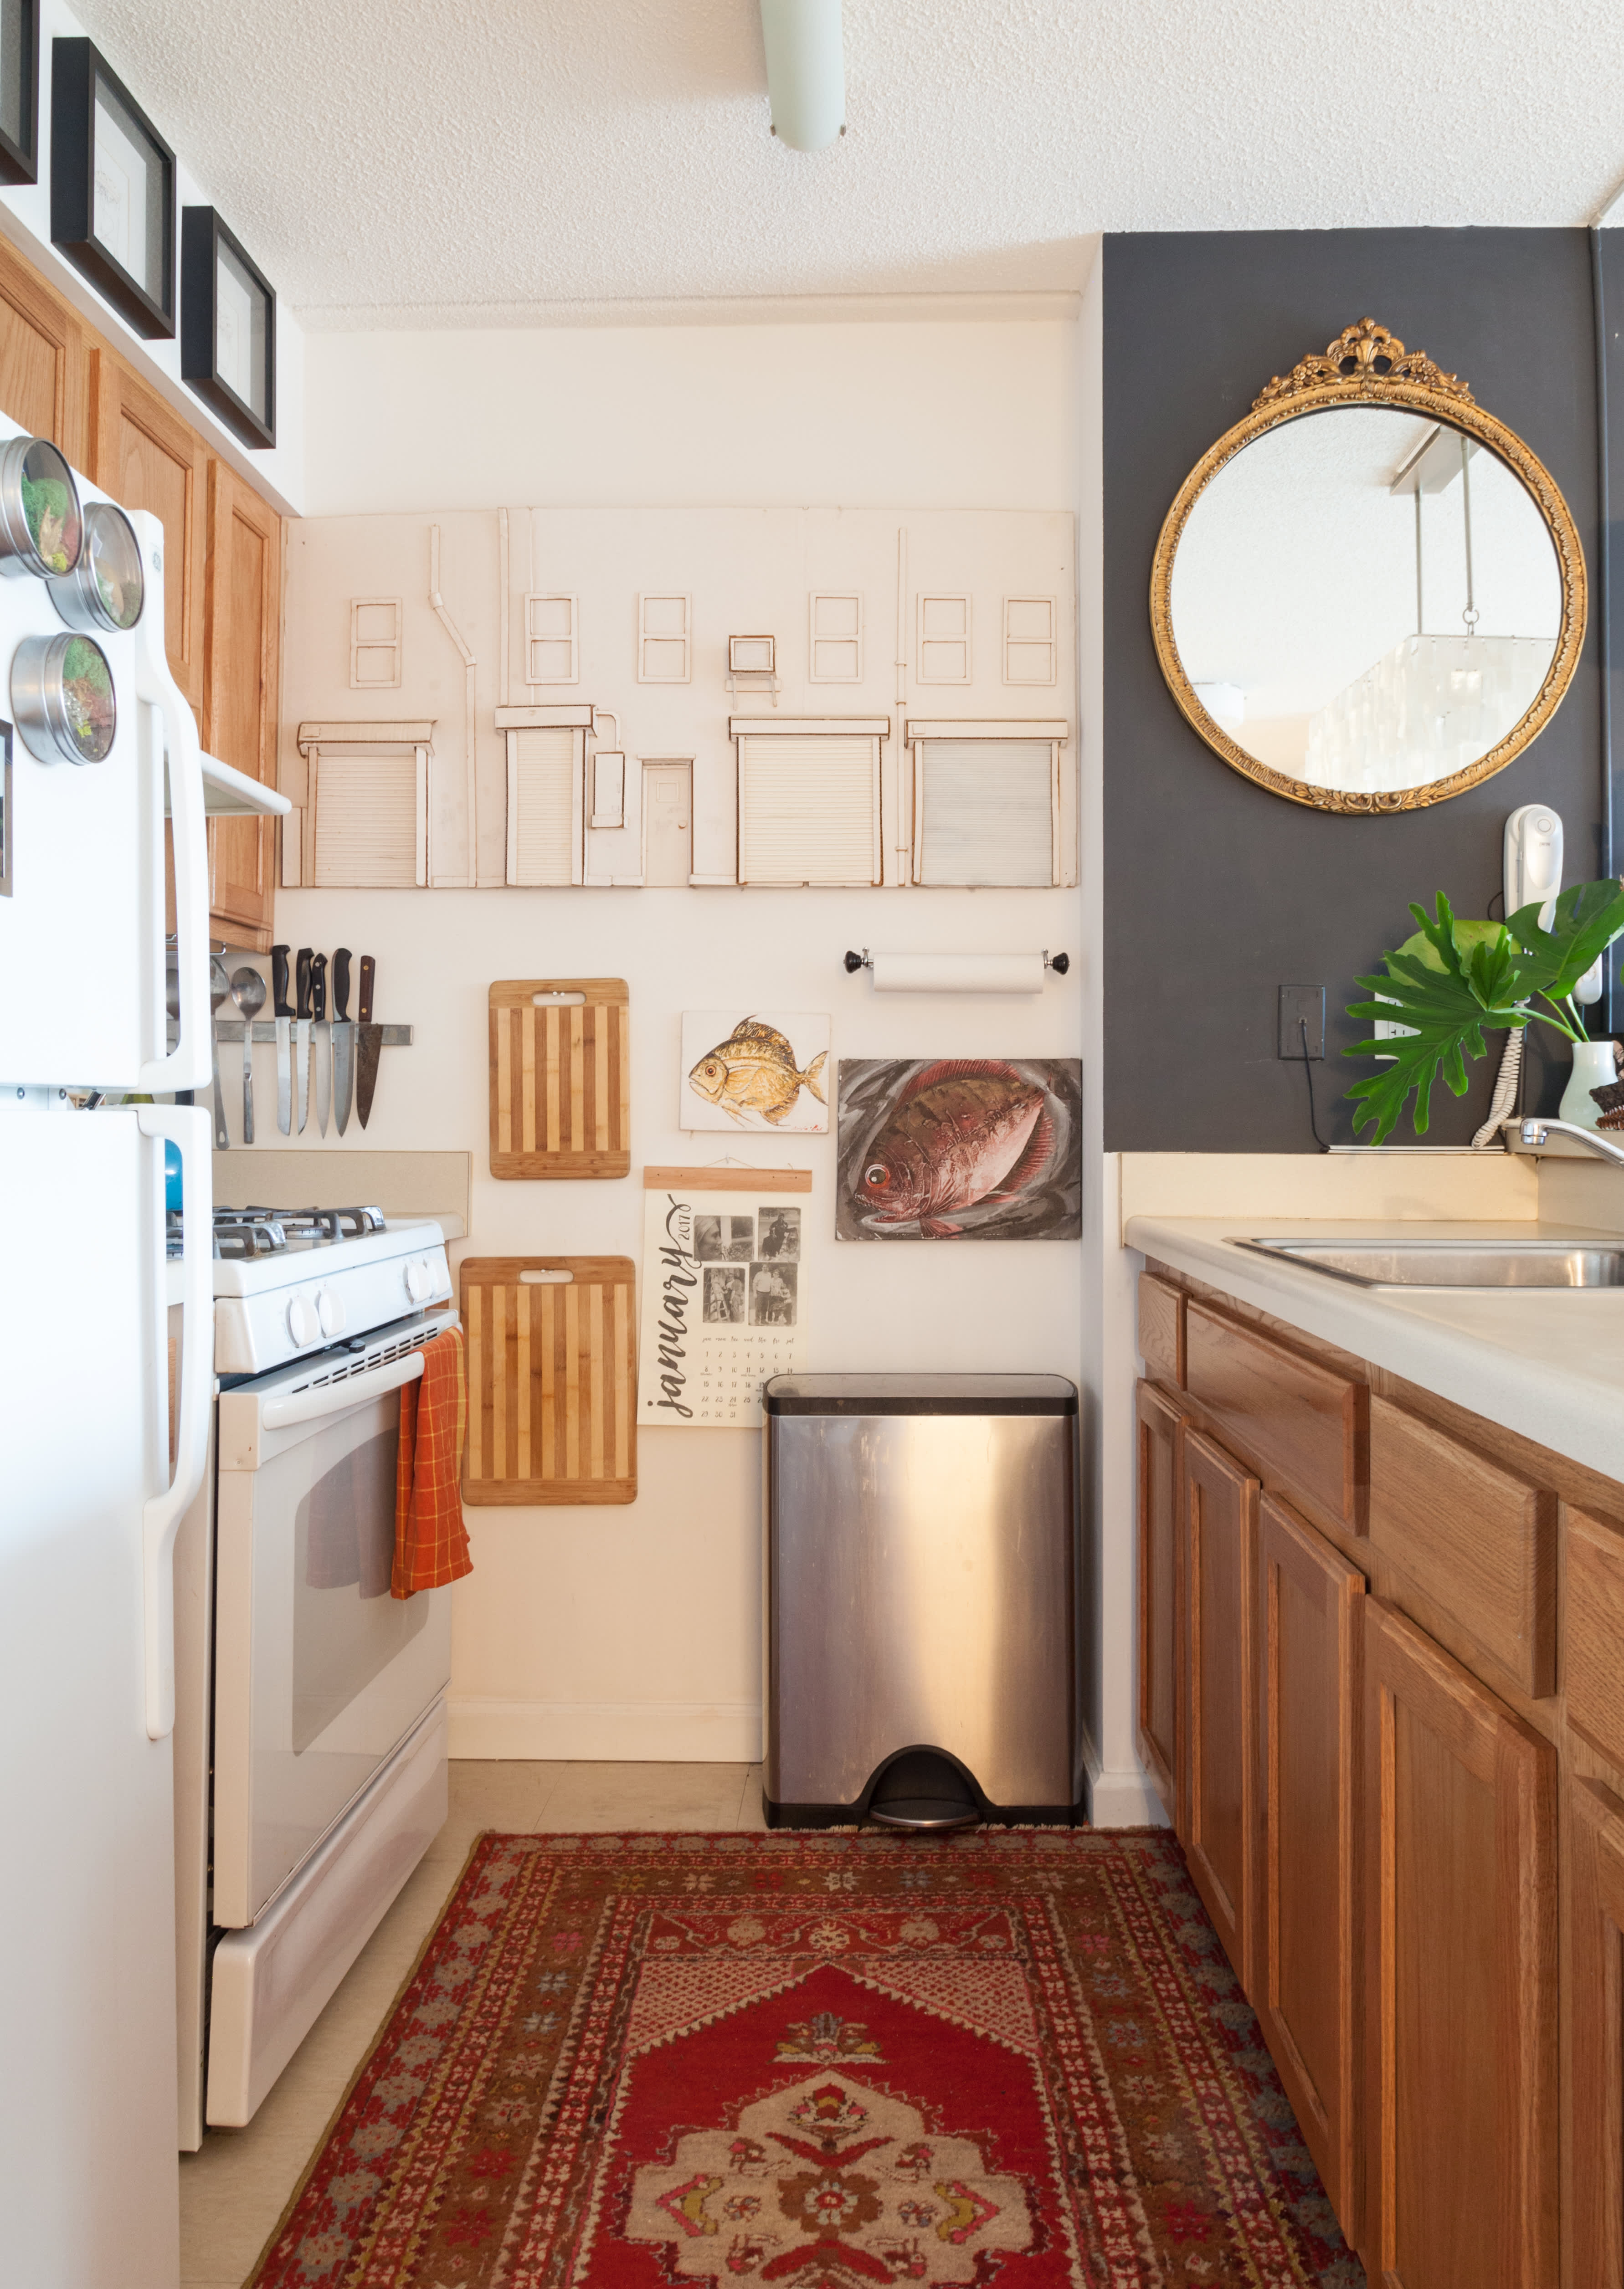 9 Kitchen Storage Tricks to Make Your Small Space Easier to Cook In